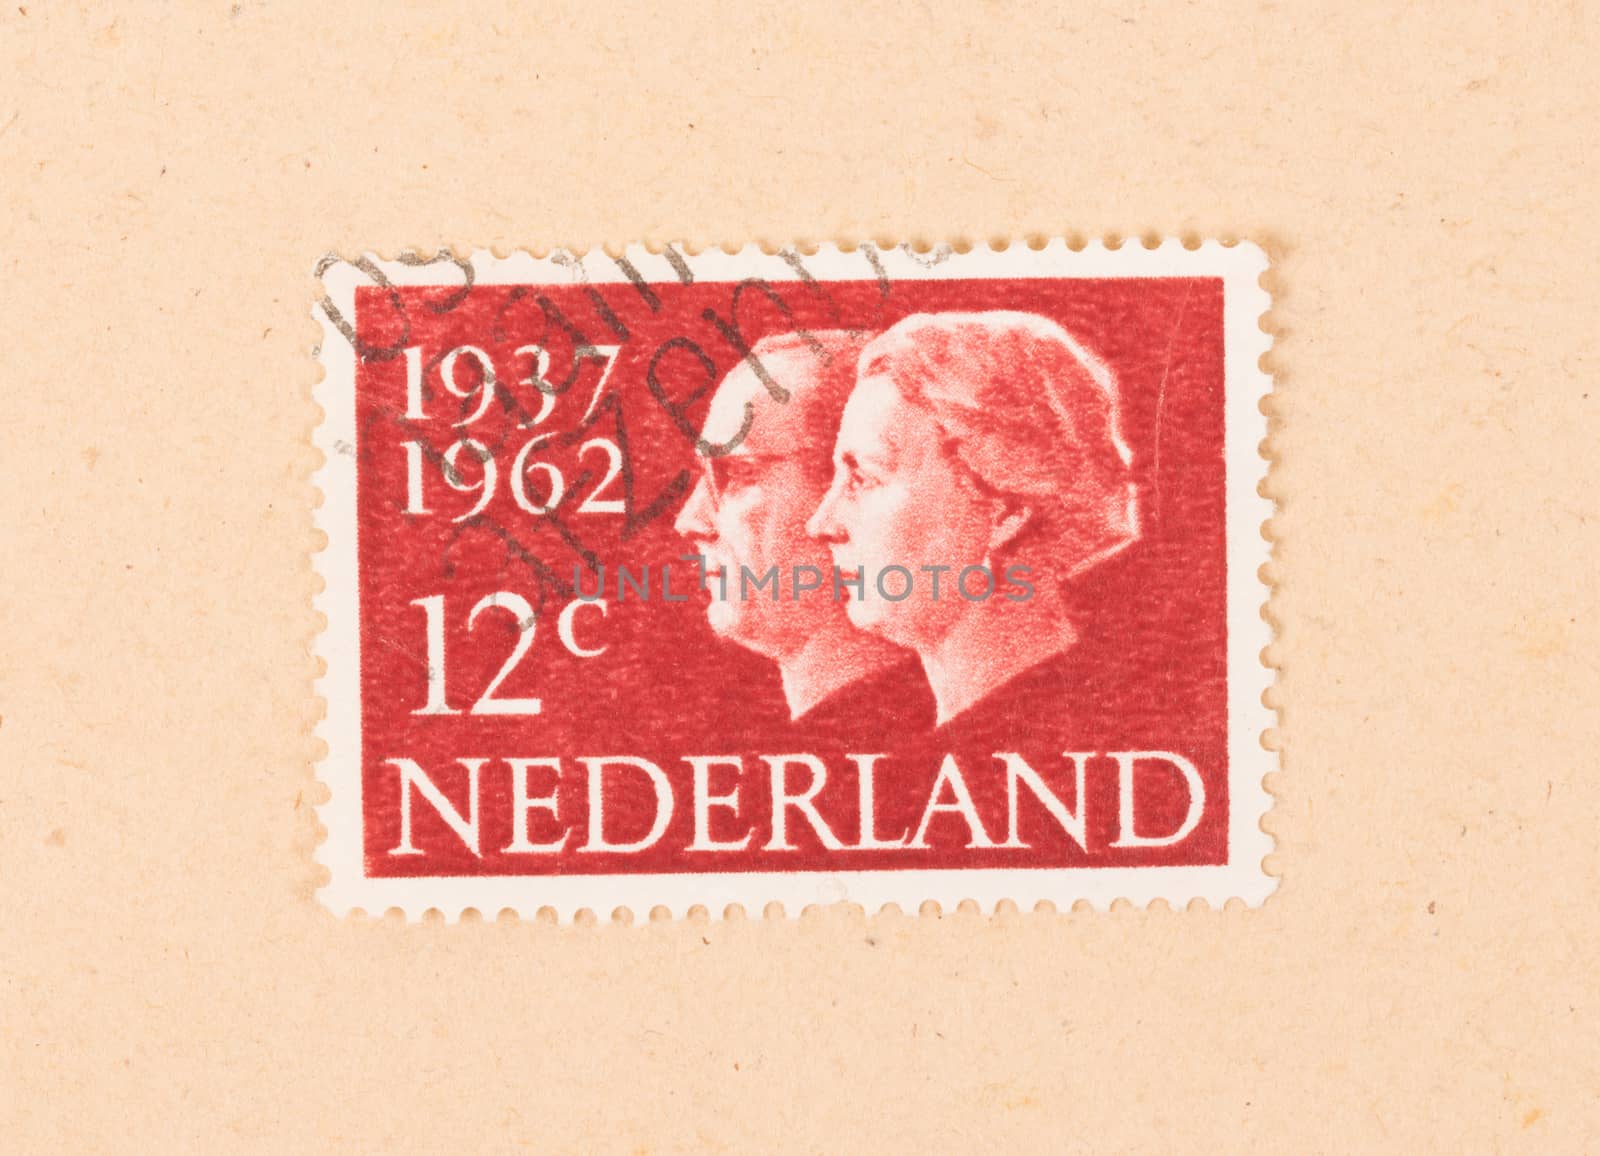 THE NETHERLANDS 1962: A stamp printed in the Netherlands shows t by michaklootwijk